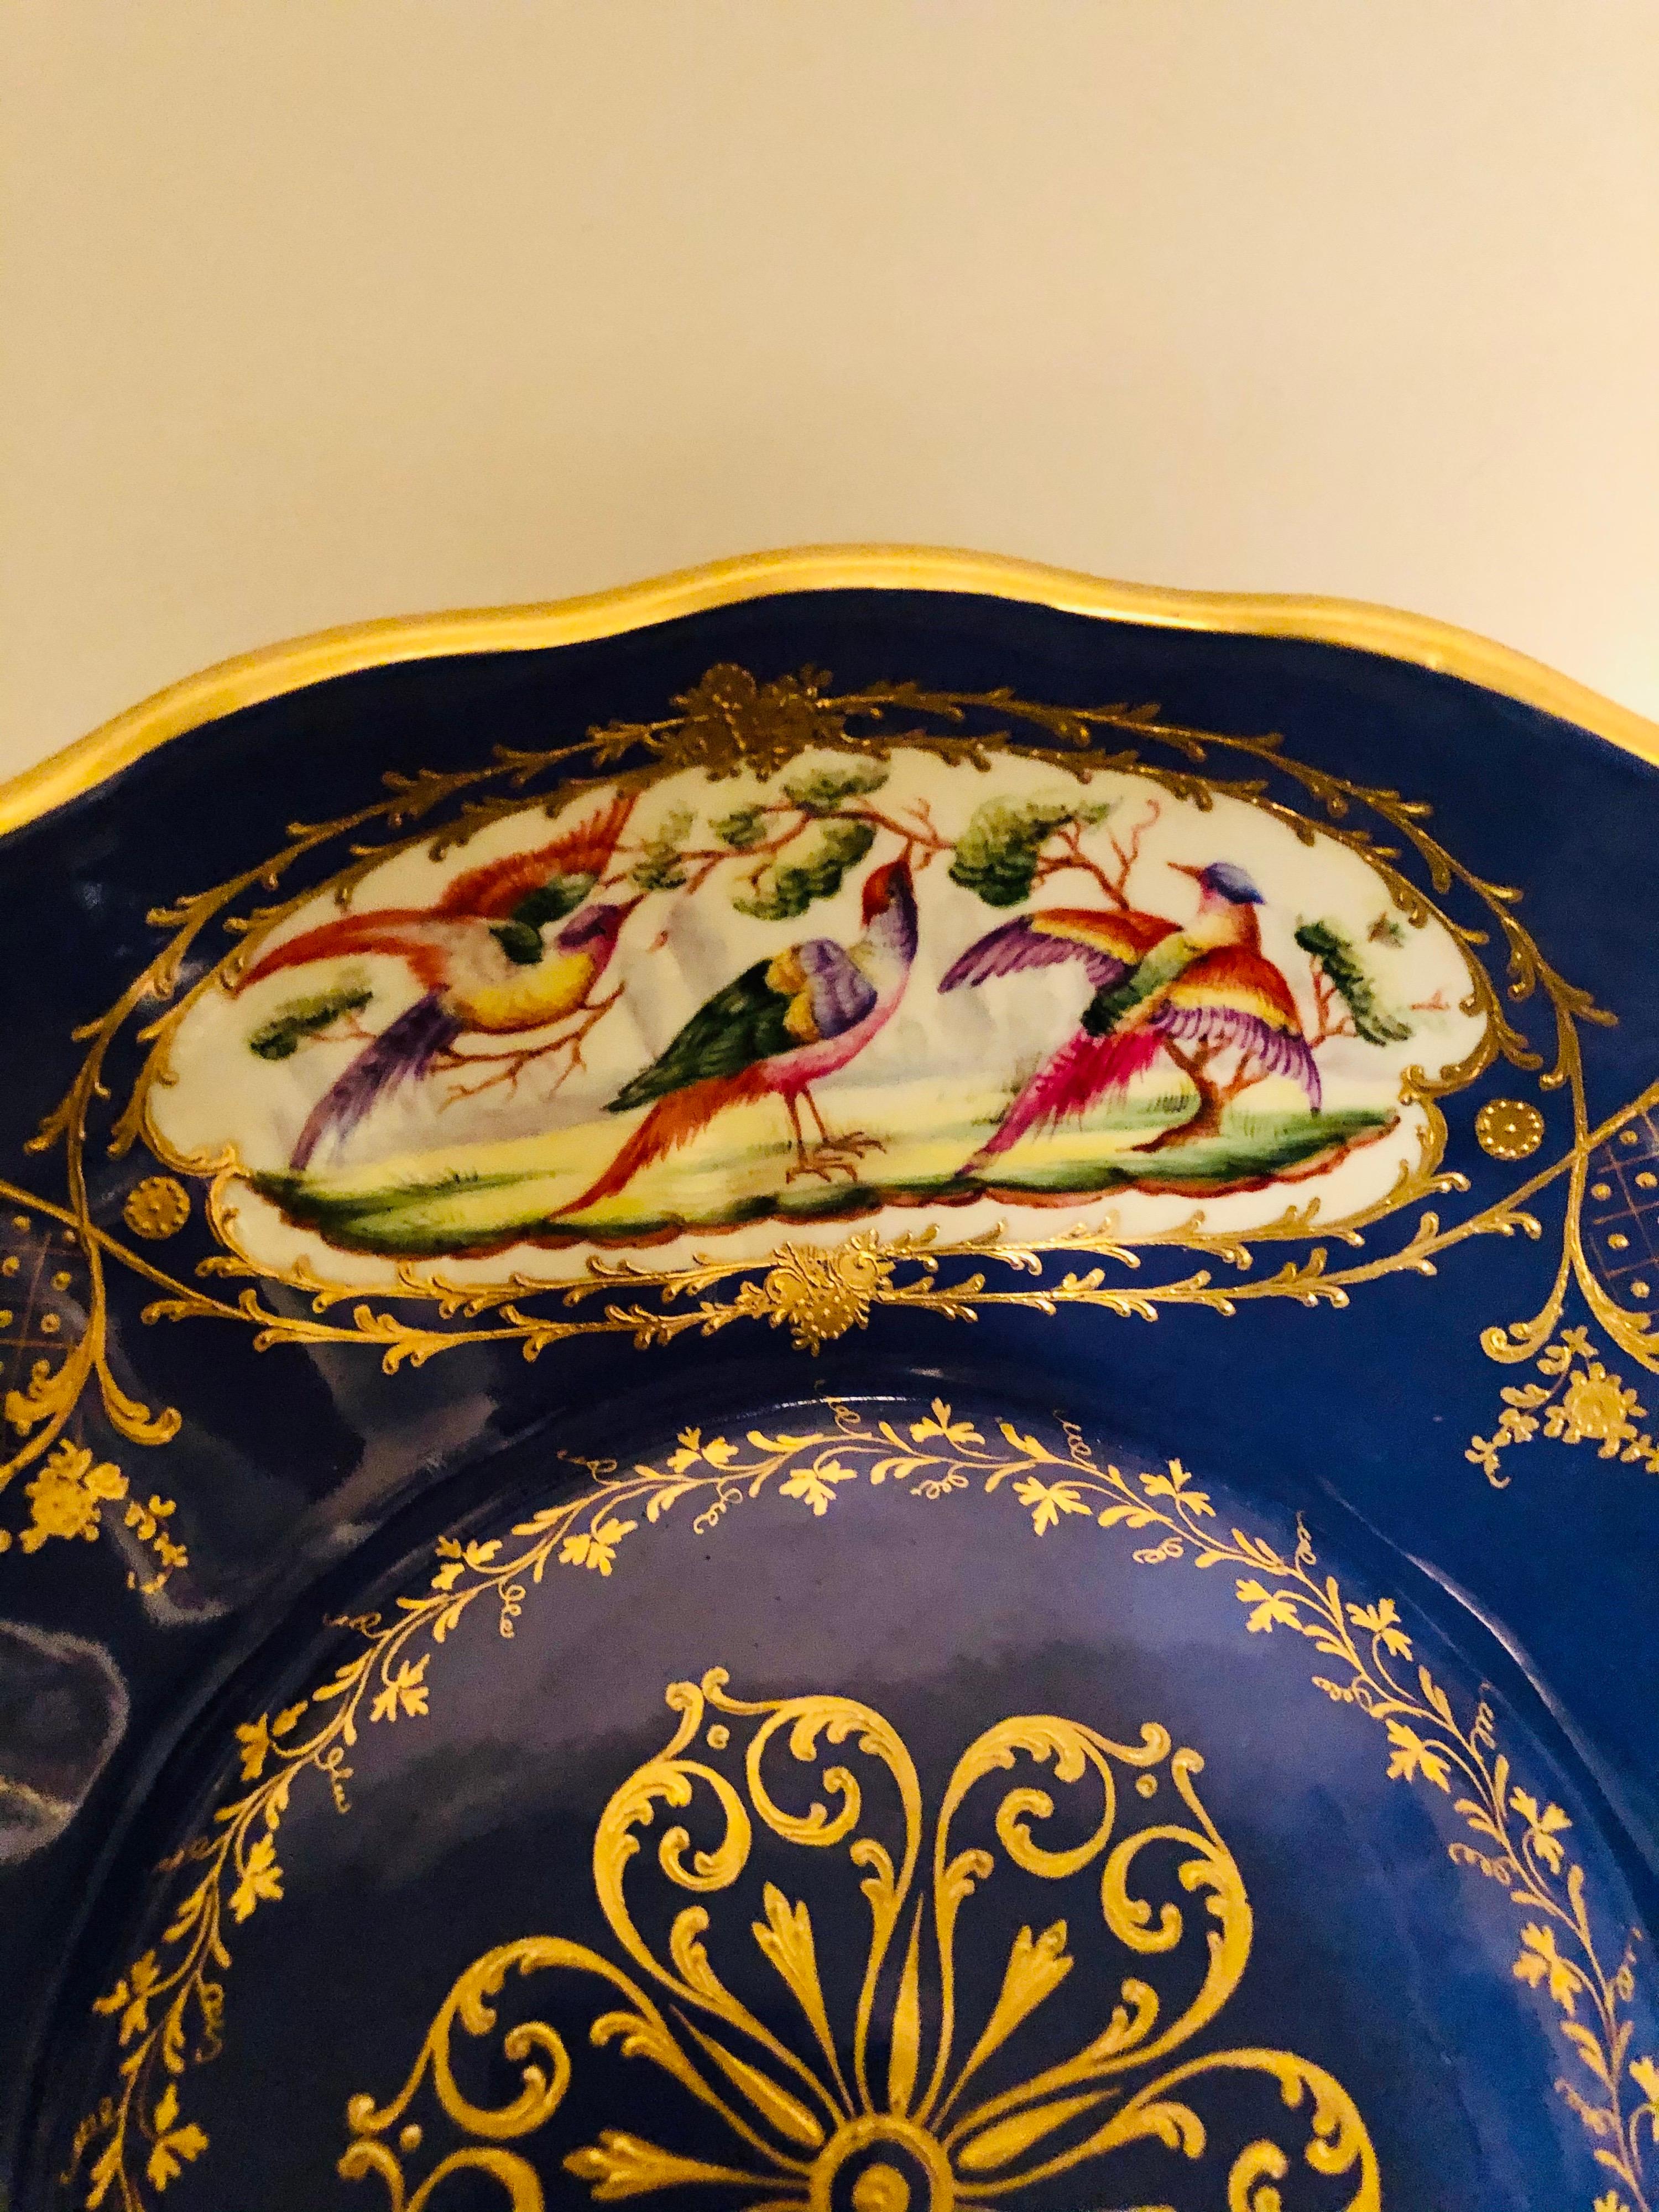 Porcelain Le Tallec Bowl Painted with 4 Medallions of Exotic Birds on Royal Blue Ground